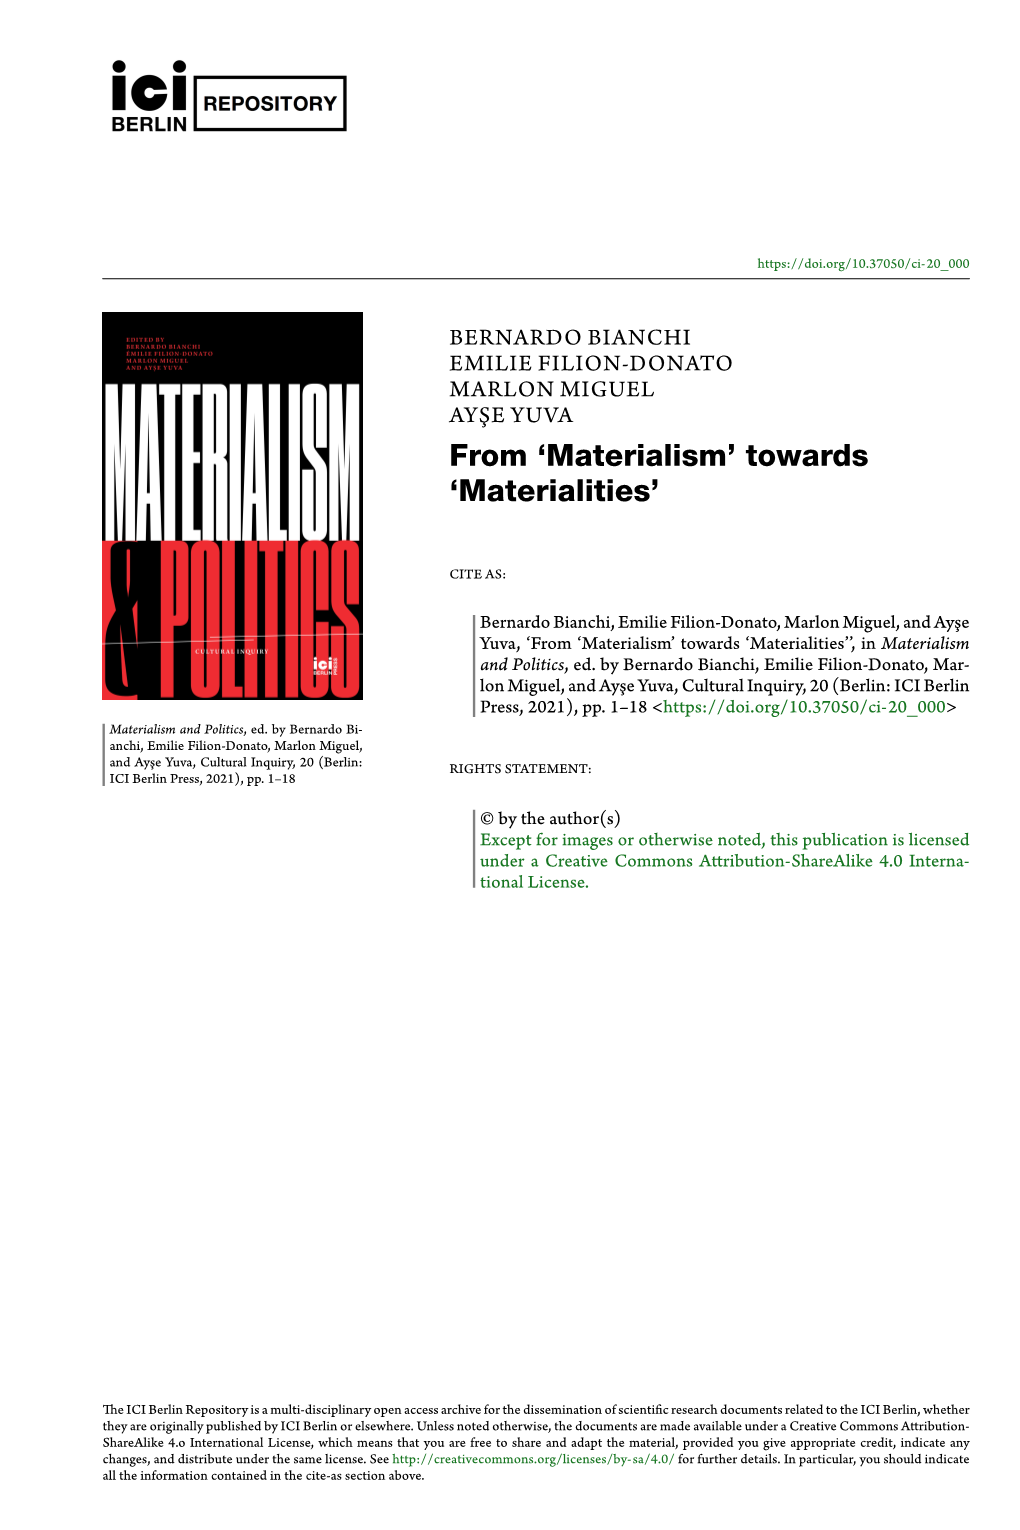 From 'Materialism' Towards 'Materialities'